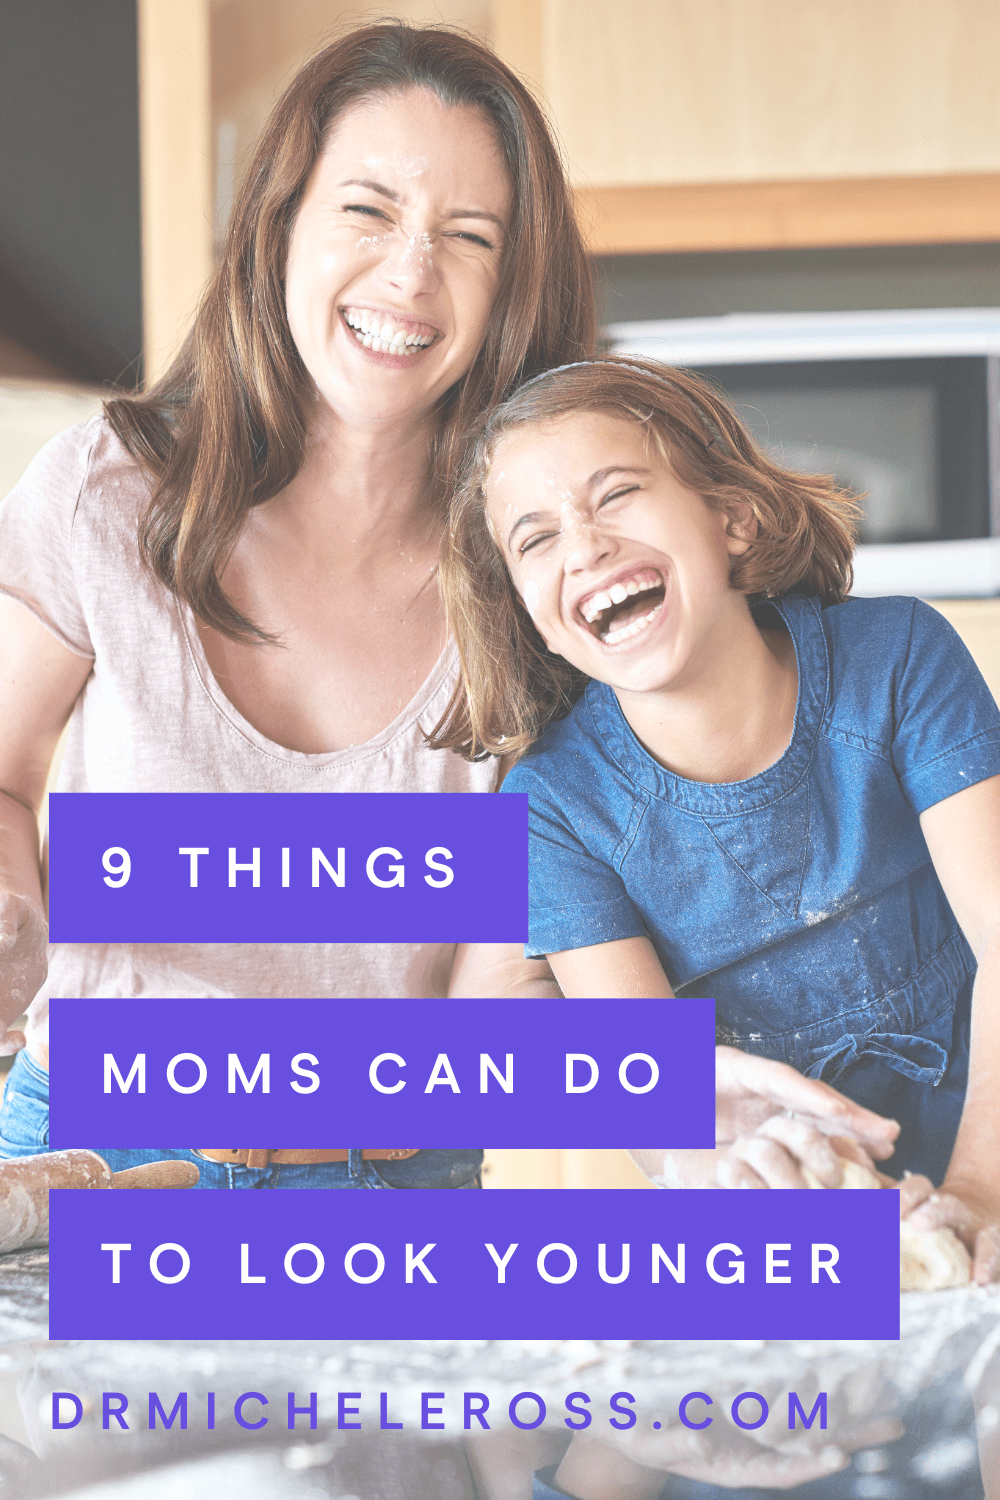 9 Things Moms Can Do to Look Younger